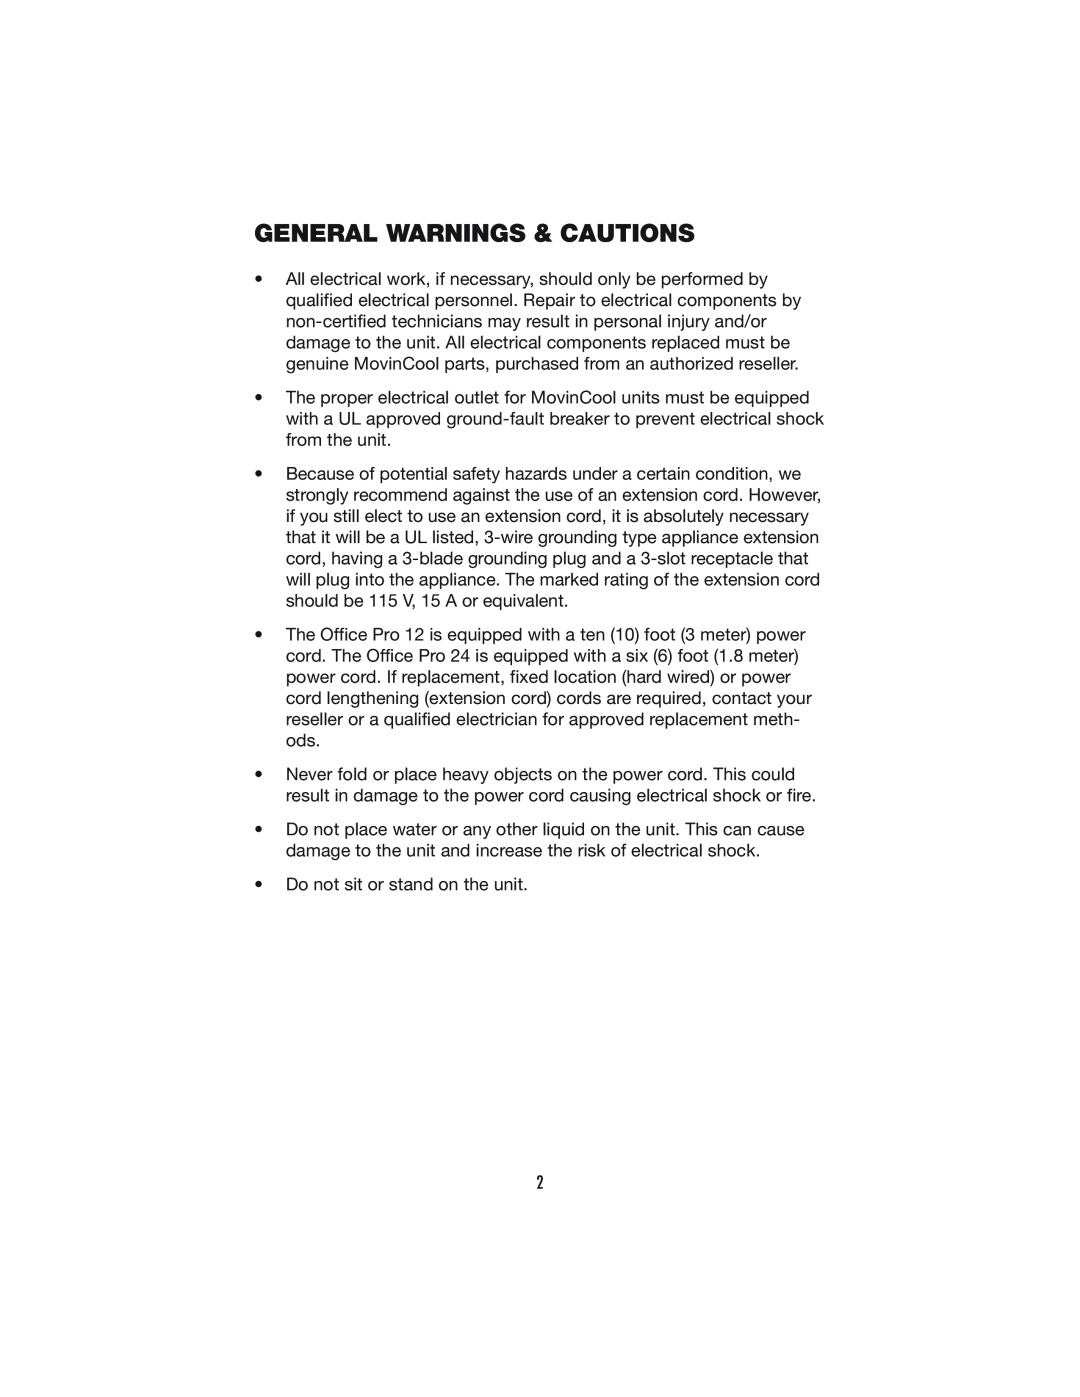 Denso OFFICE PRO 12, OFFICE PRO 24 operation manual General Warnings & Cautions 